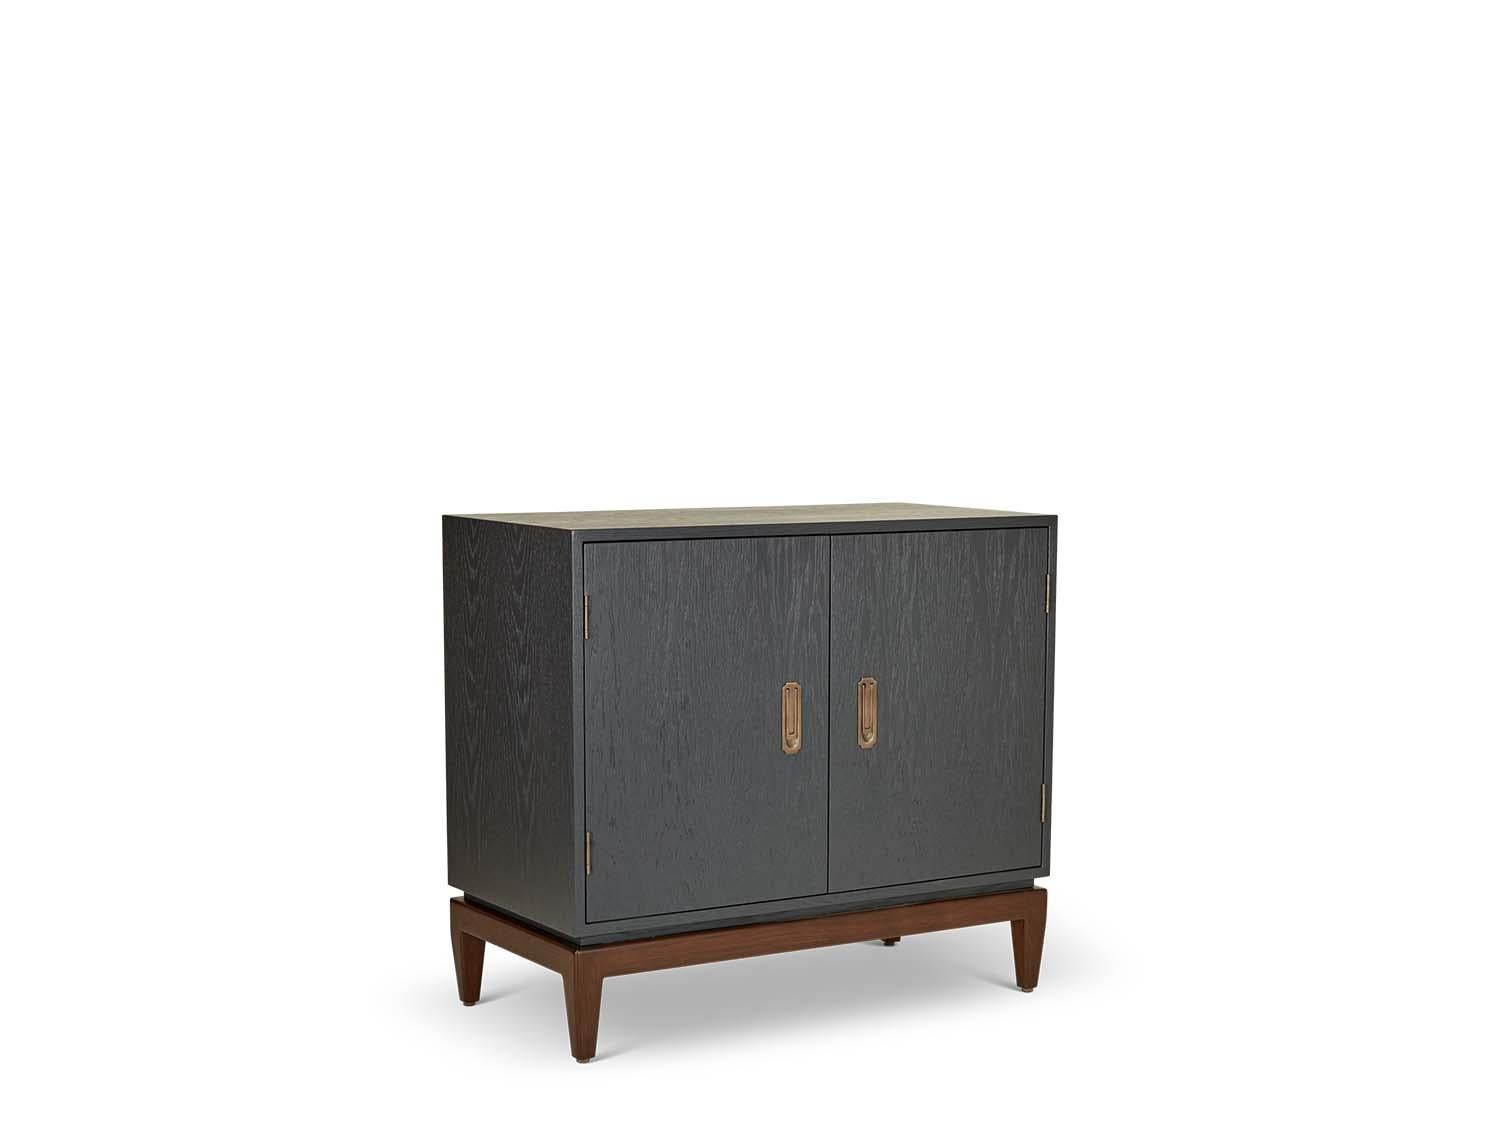 The 2-door Arcadia cabinet features two doors, hand-crafted vintage-style hardware, and a sculptural solid American walnut or white oak base. 

The Lawson-Fenning Collection is designed and handmade in Los Angeles, California. Reach out to